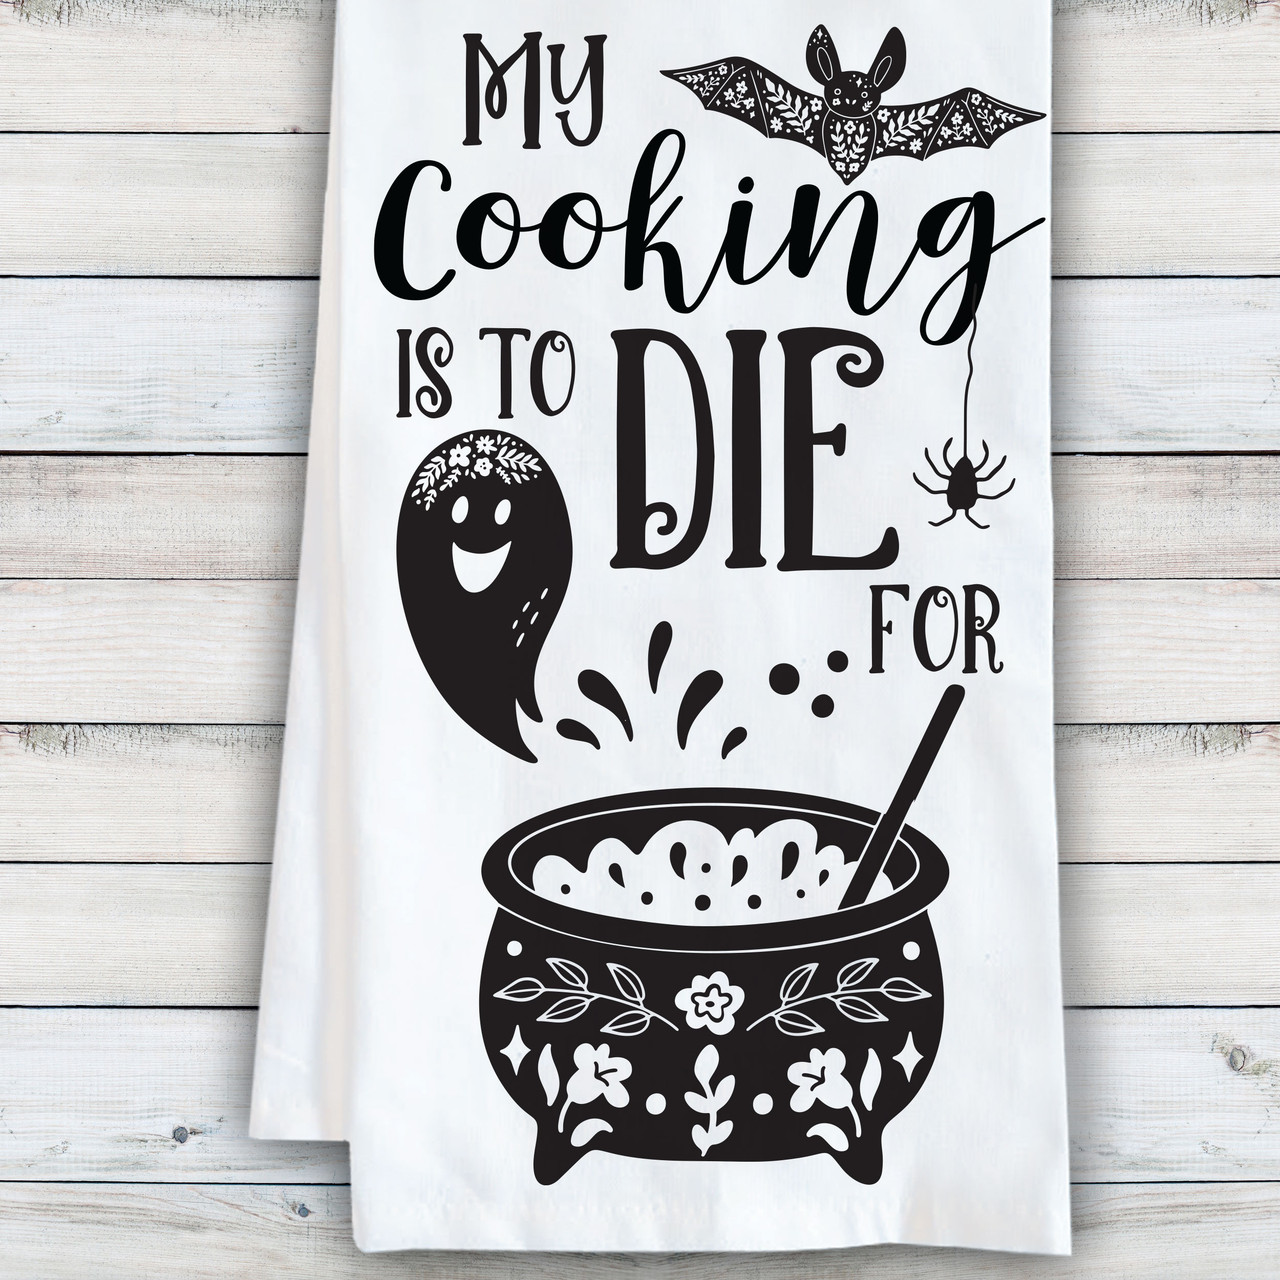 https://cdn11.bigcommerce.com/s-5grzuu6/images/stencil/1280x1280/products/6683/55583/To-Die-For-Funny_Halloween-Kitchen-Tea_Towels__57869.1694805679.jpg?c=2